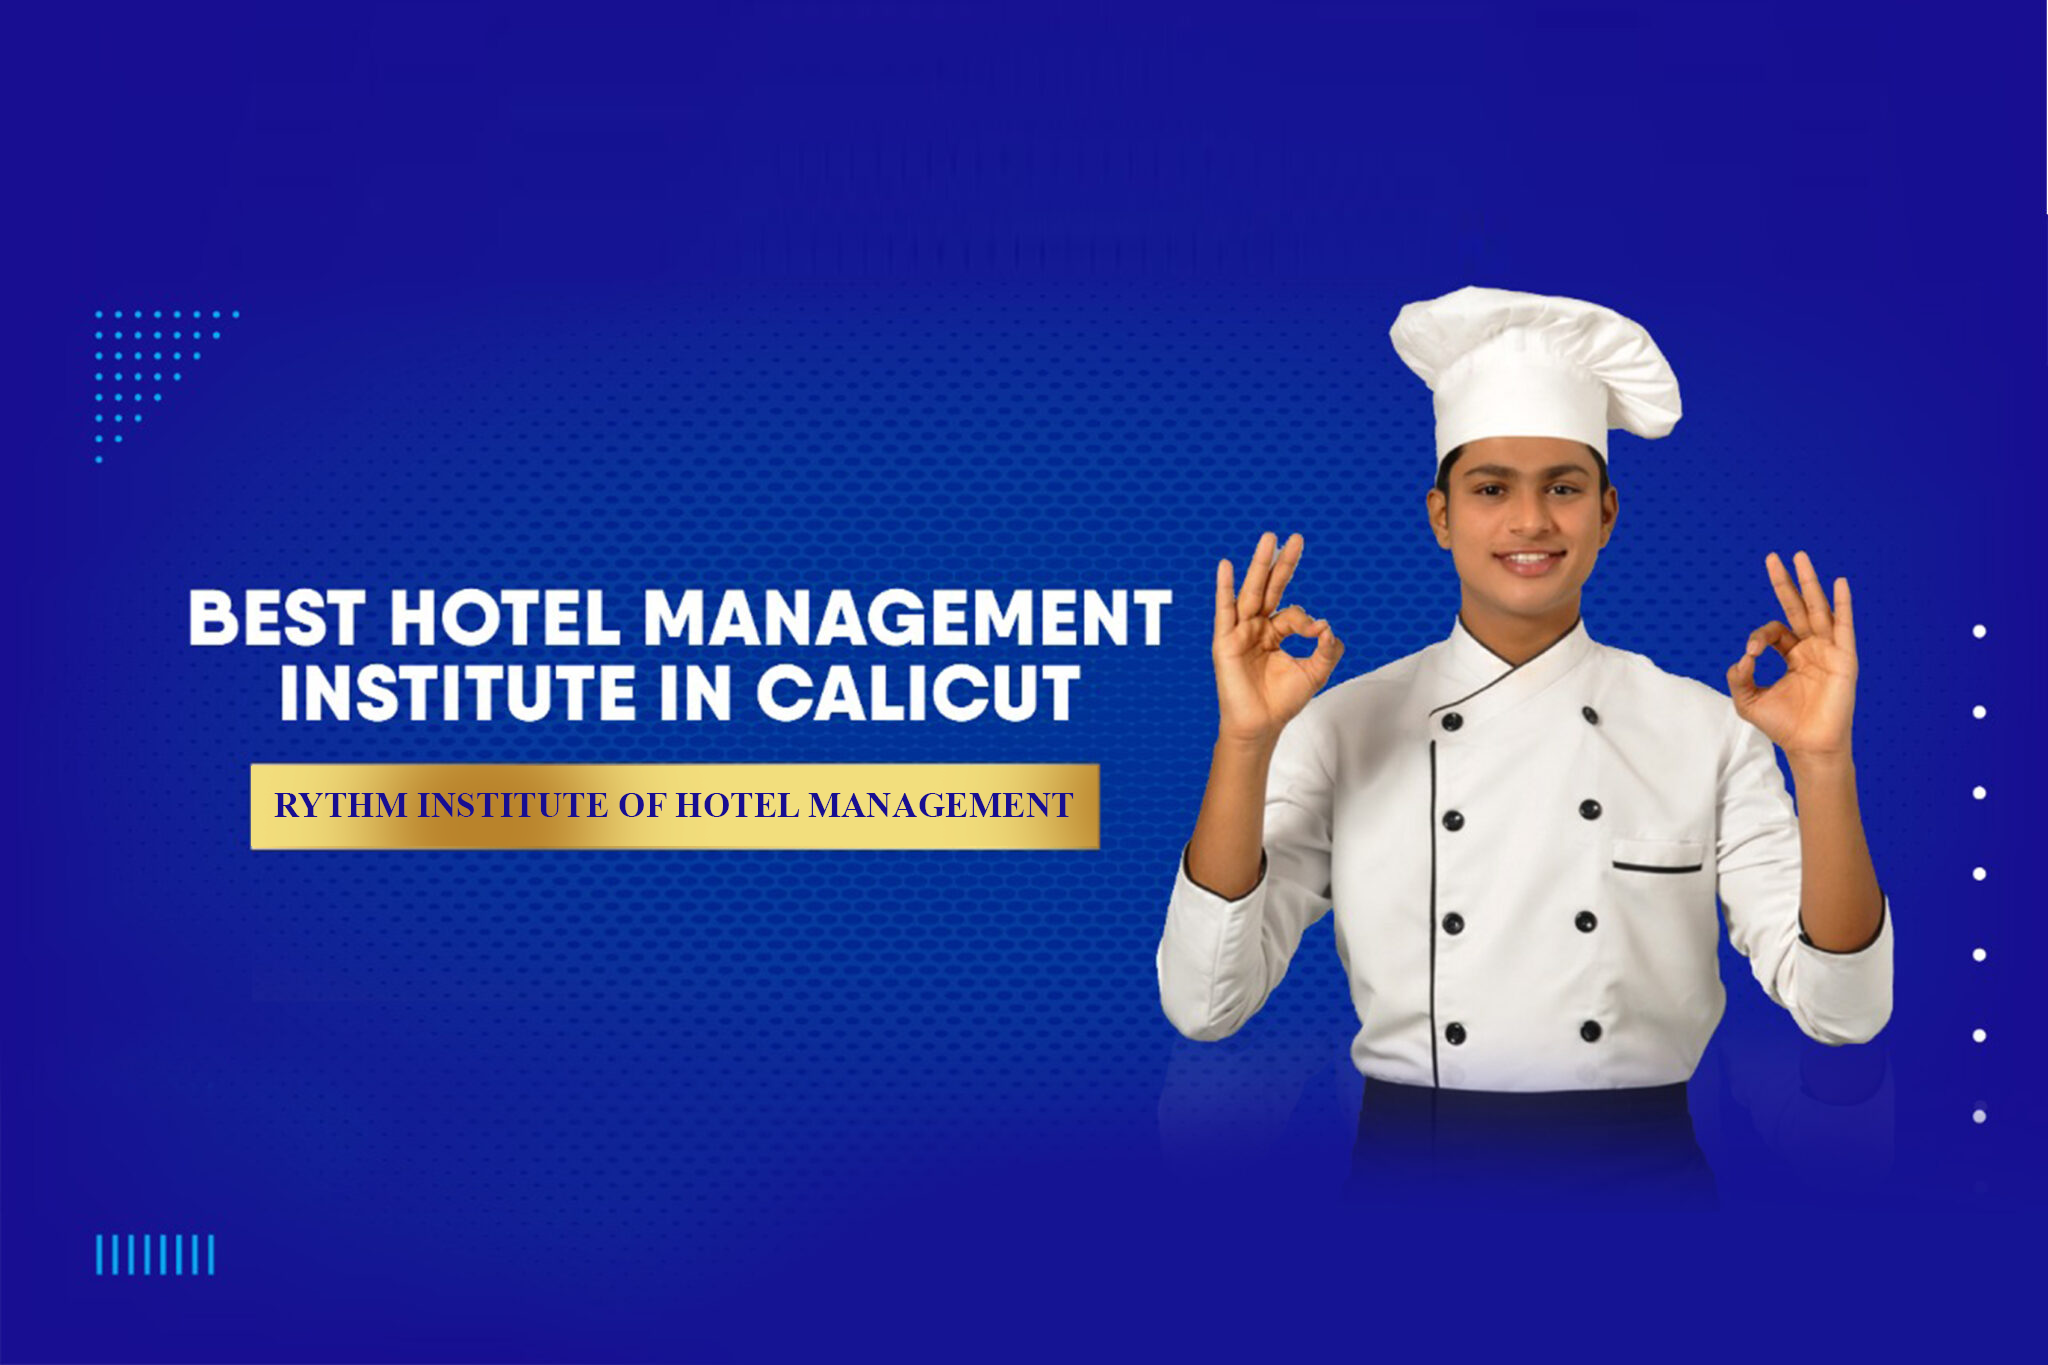 Invest in Your Future: Join the Best Hotel Management Institute in Calicut Today